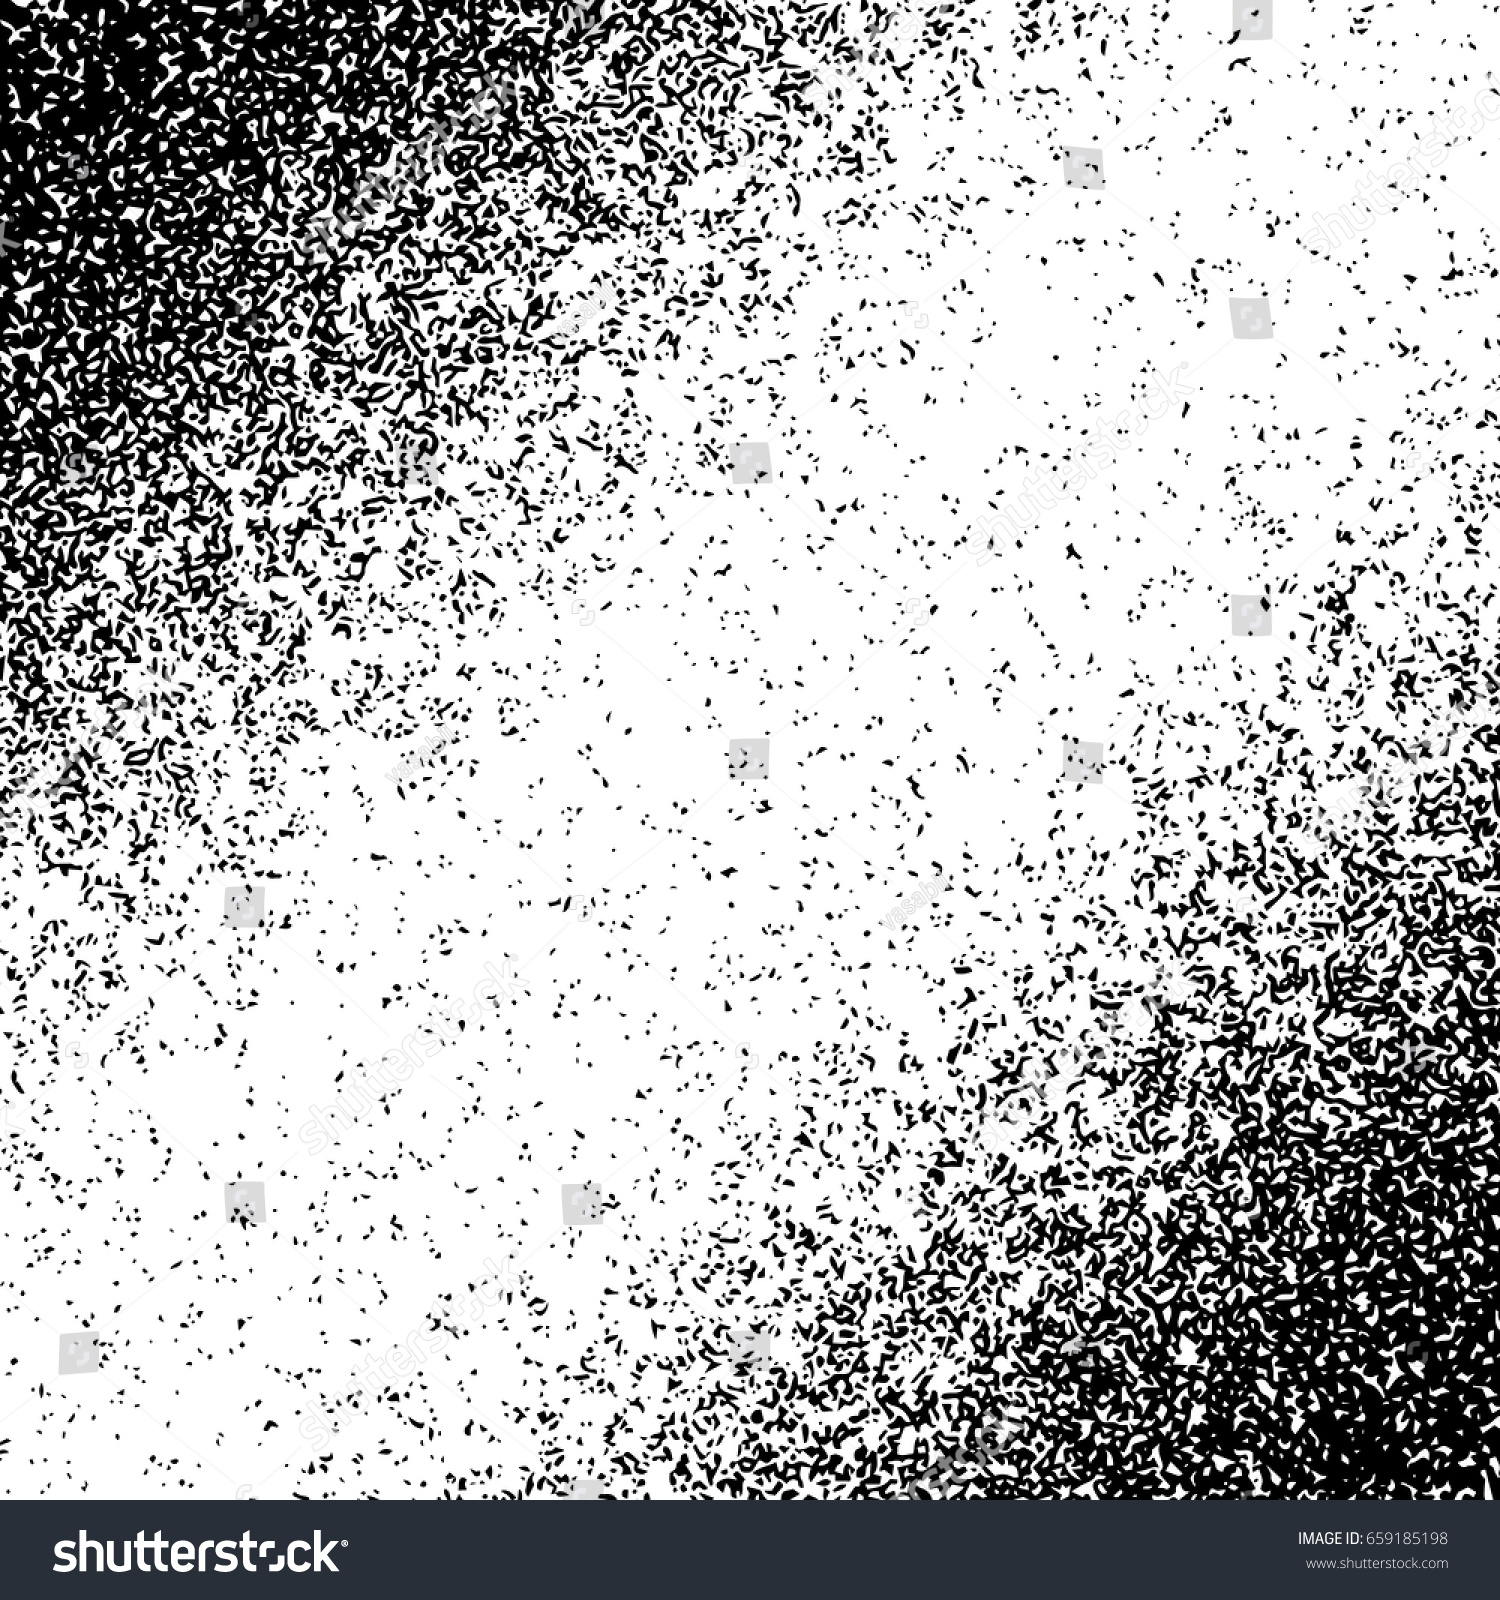 Distressed Grunge Noise Texture Design Element Stock Vector HD ...